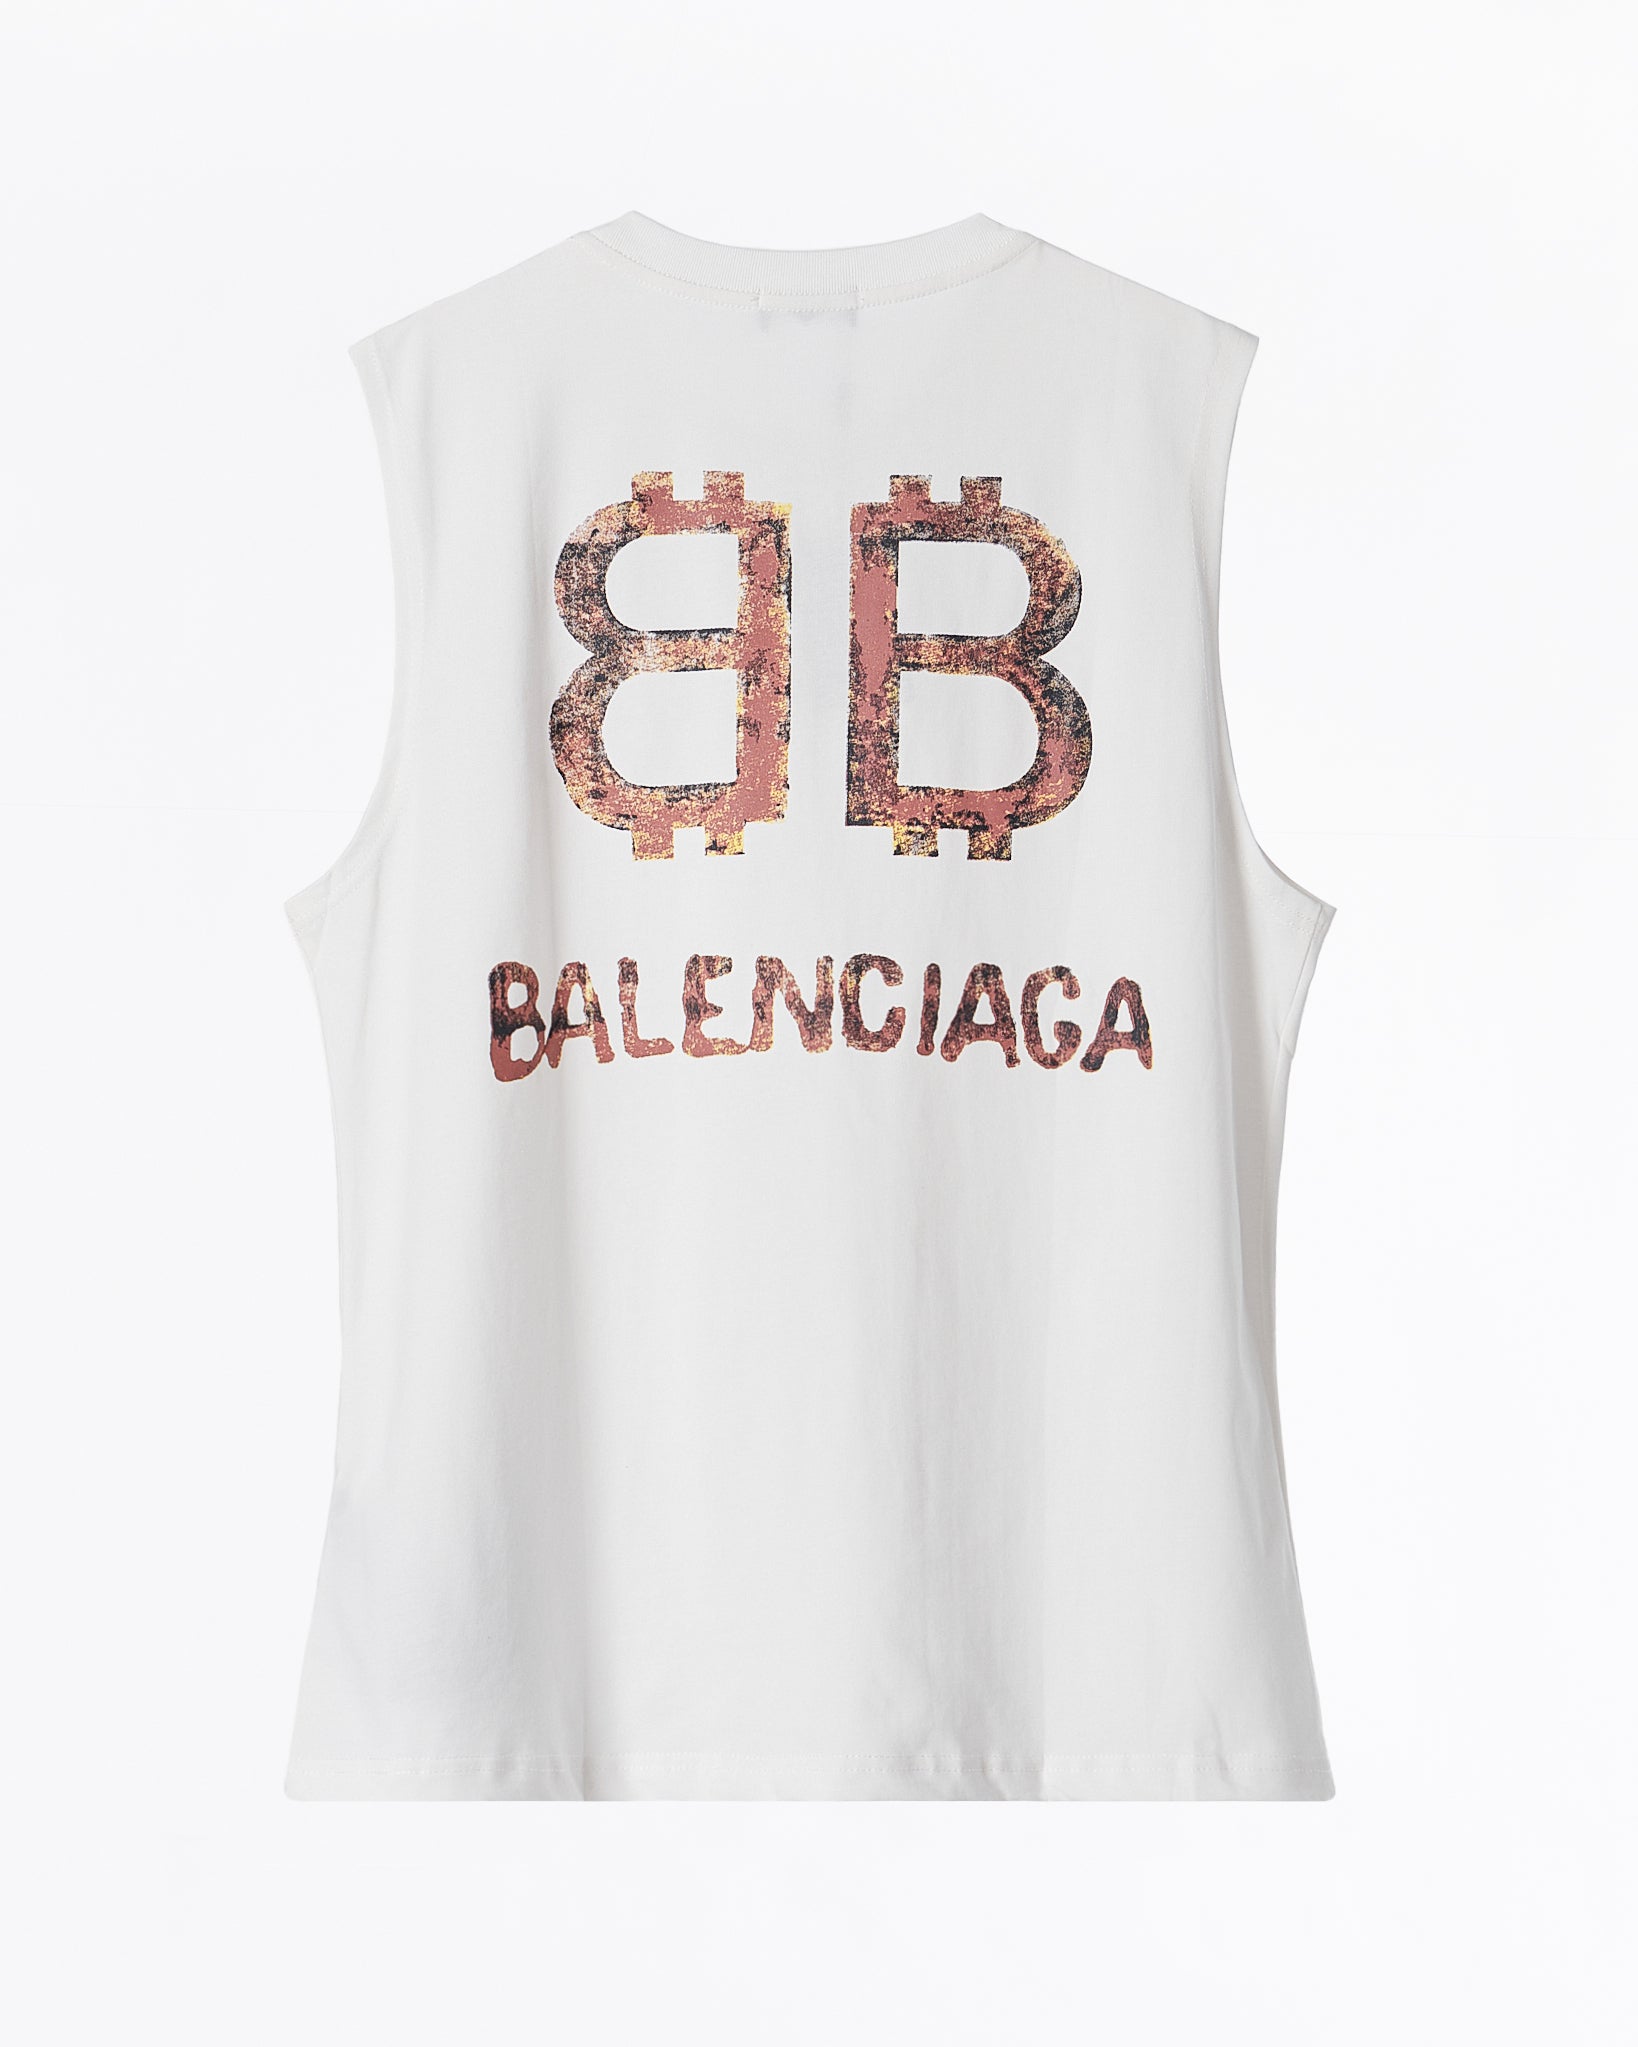 BAL Front and Back Printed Men White Tank Top 23.90